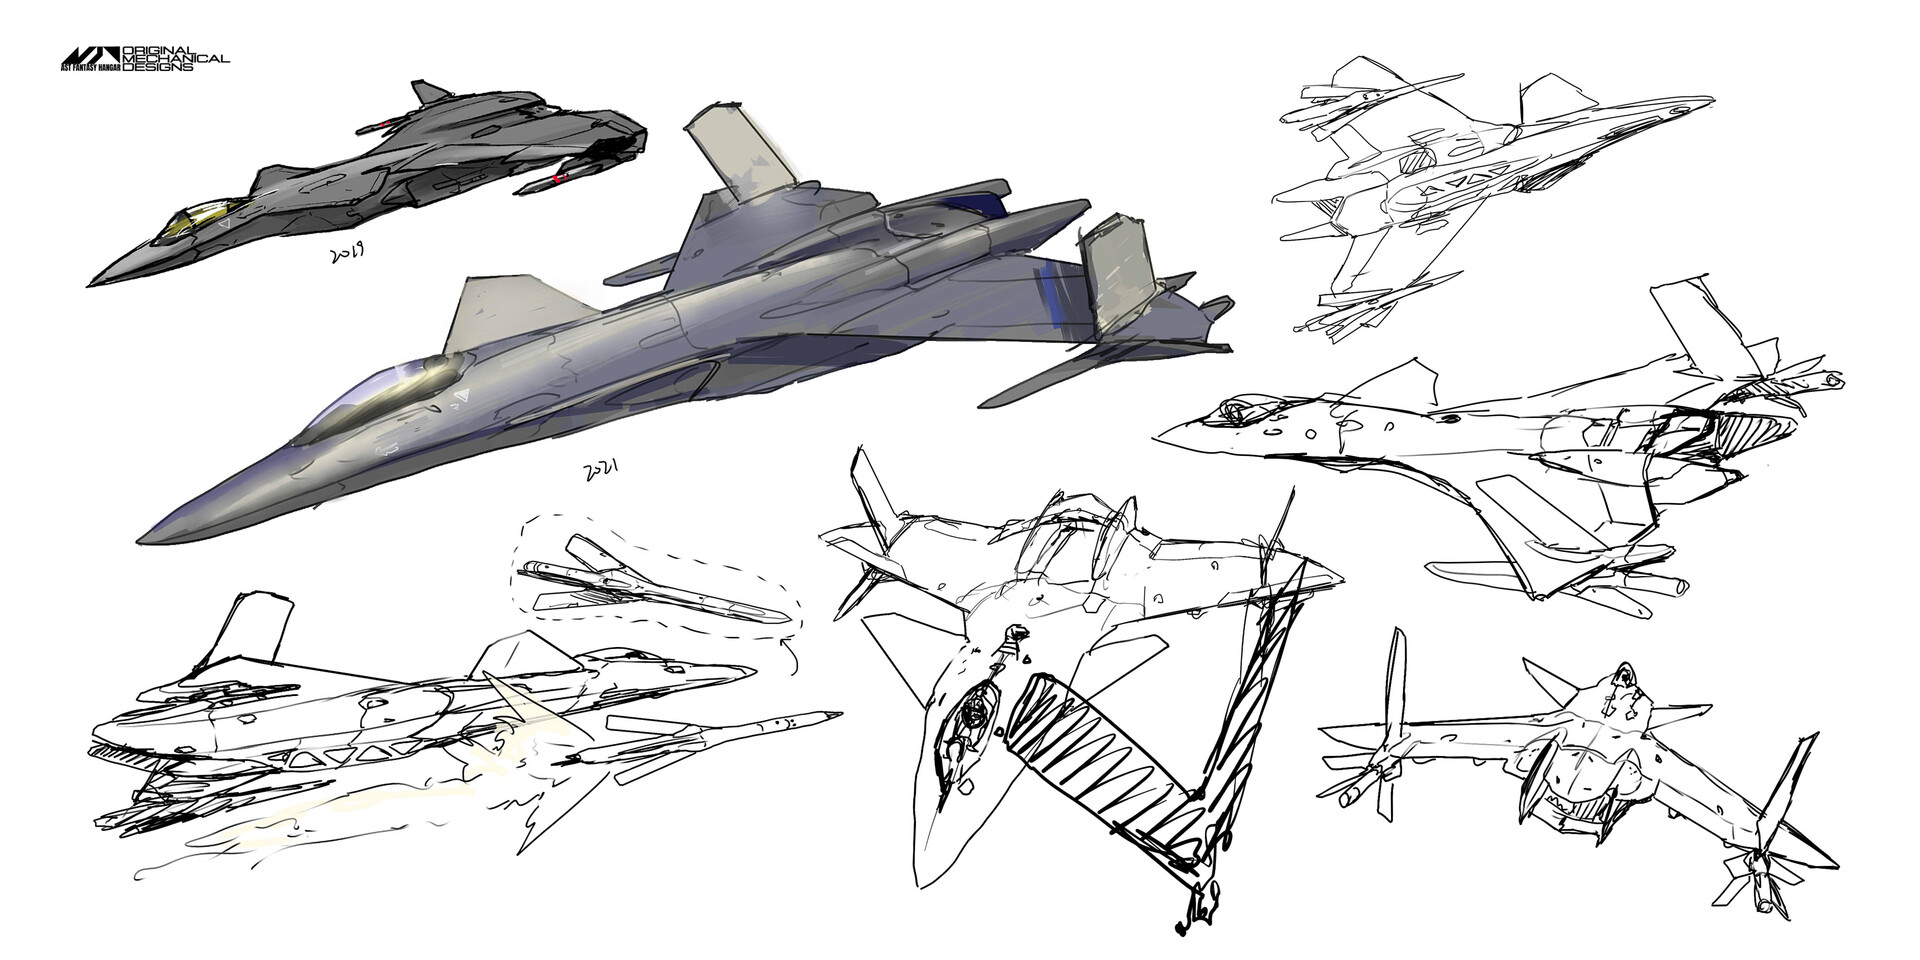 How to draw a Fighter jet | Step by Step - YouTube